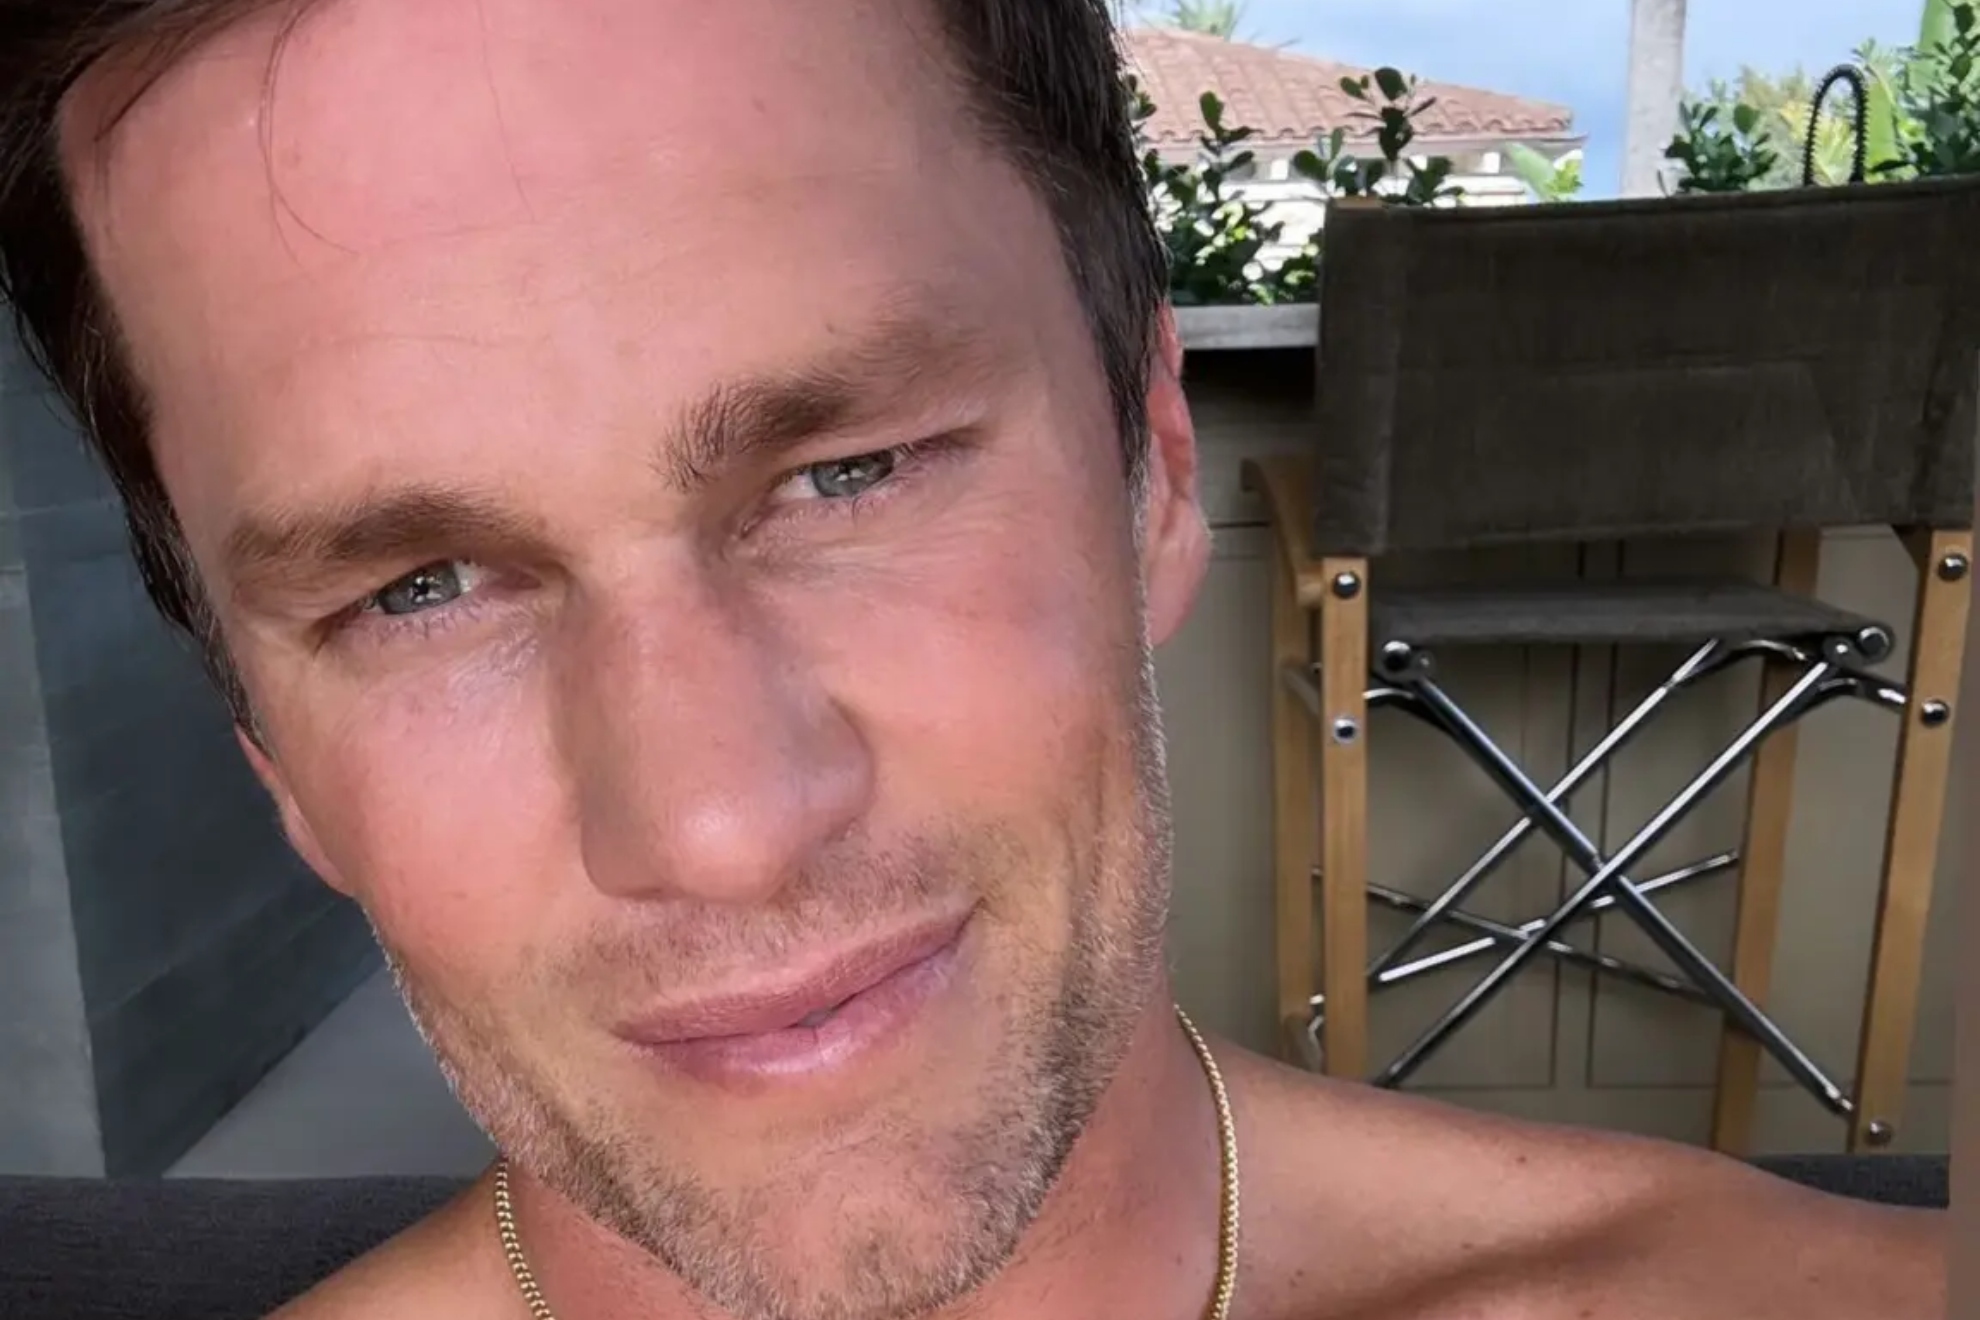 Tom Bradys shirtless pool party invitation raises questions while Gisel Bundchens romance goes great